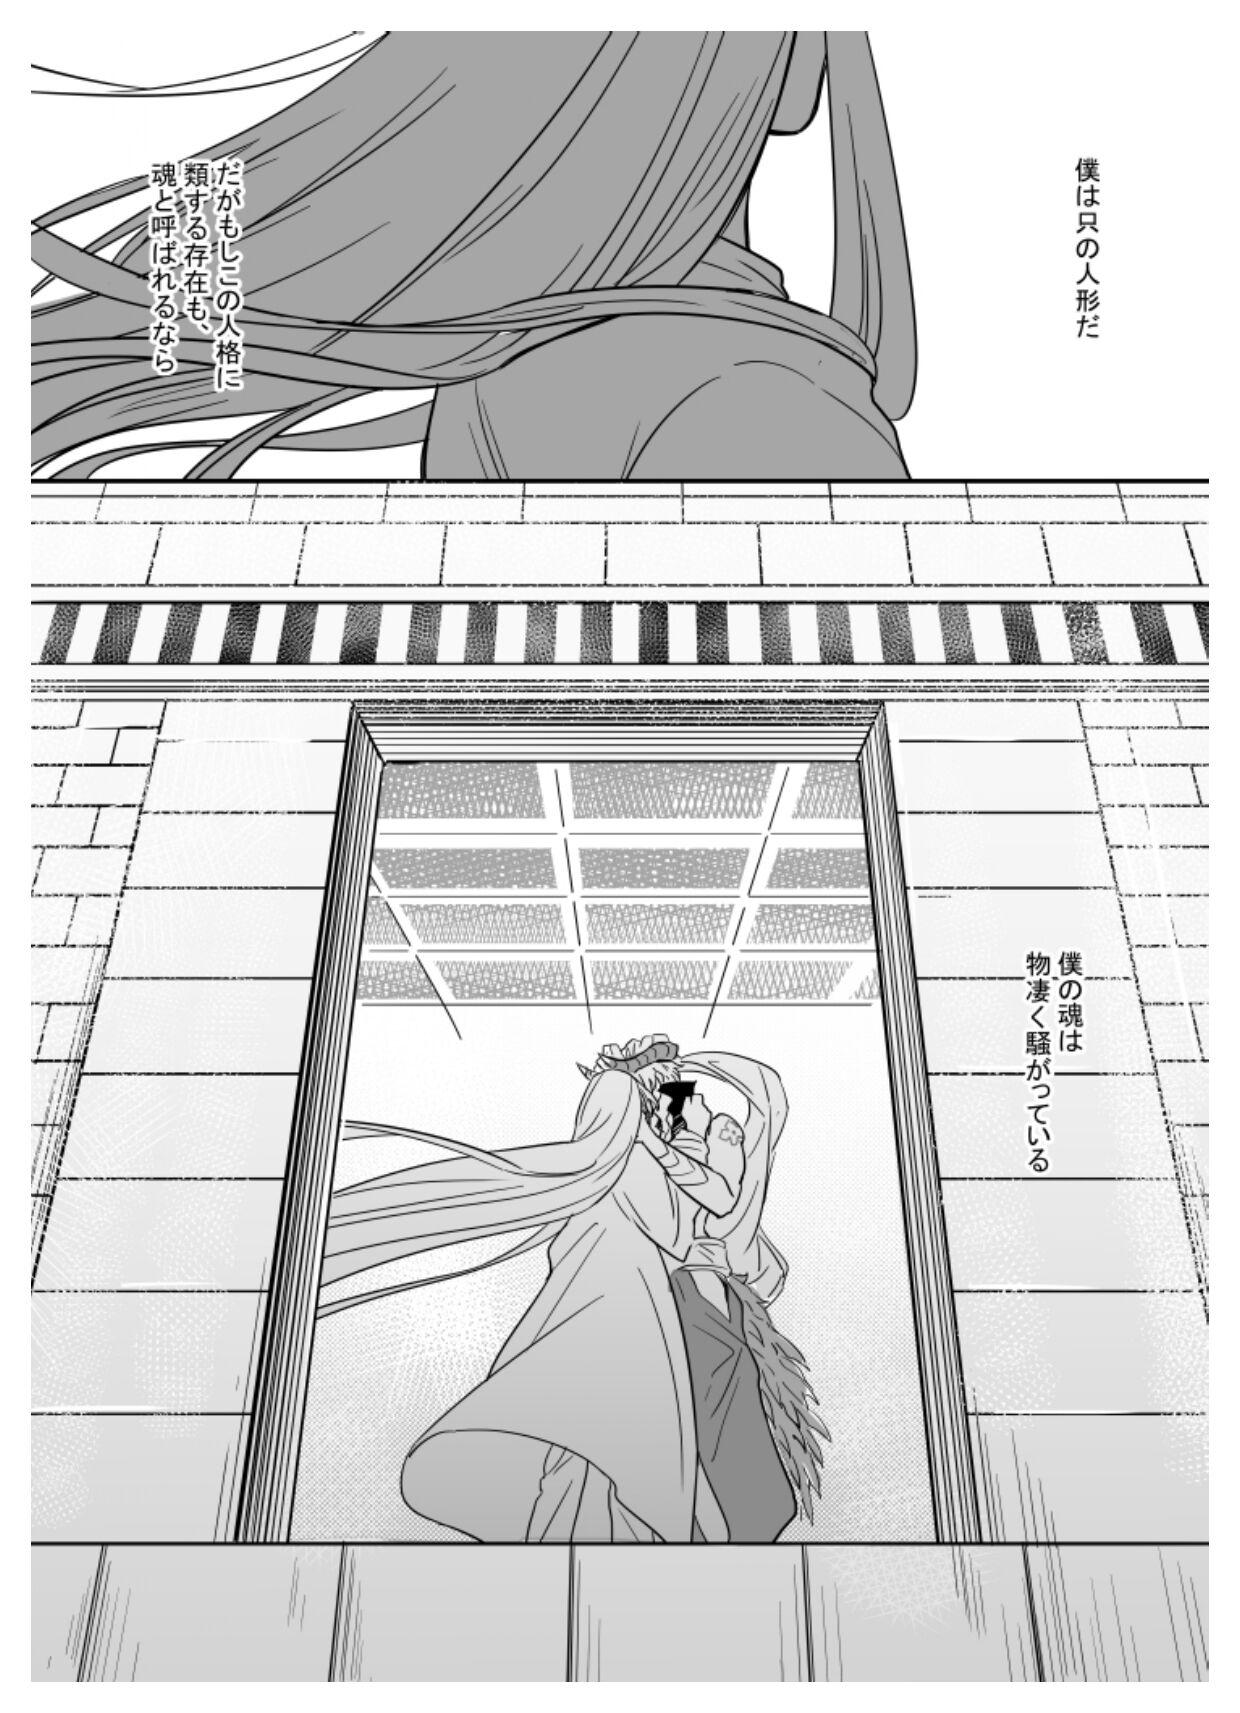 Girl Girl If I have soul - Fate grand order Unshaved - Page 14